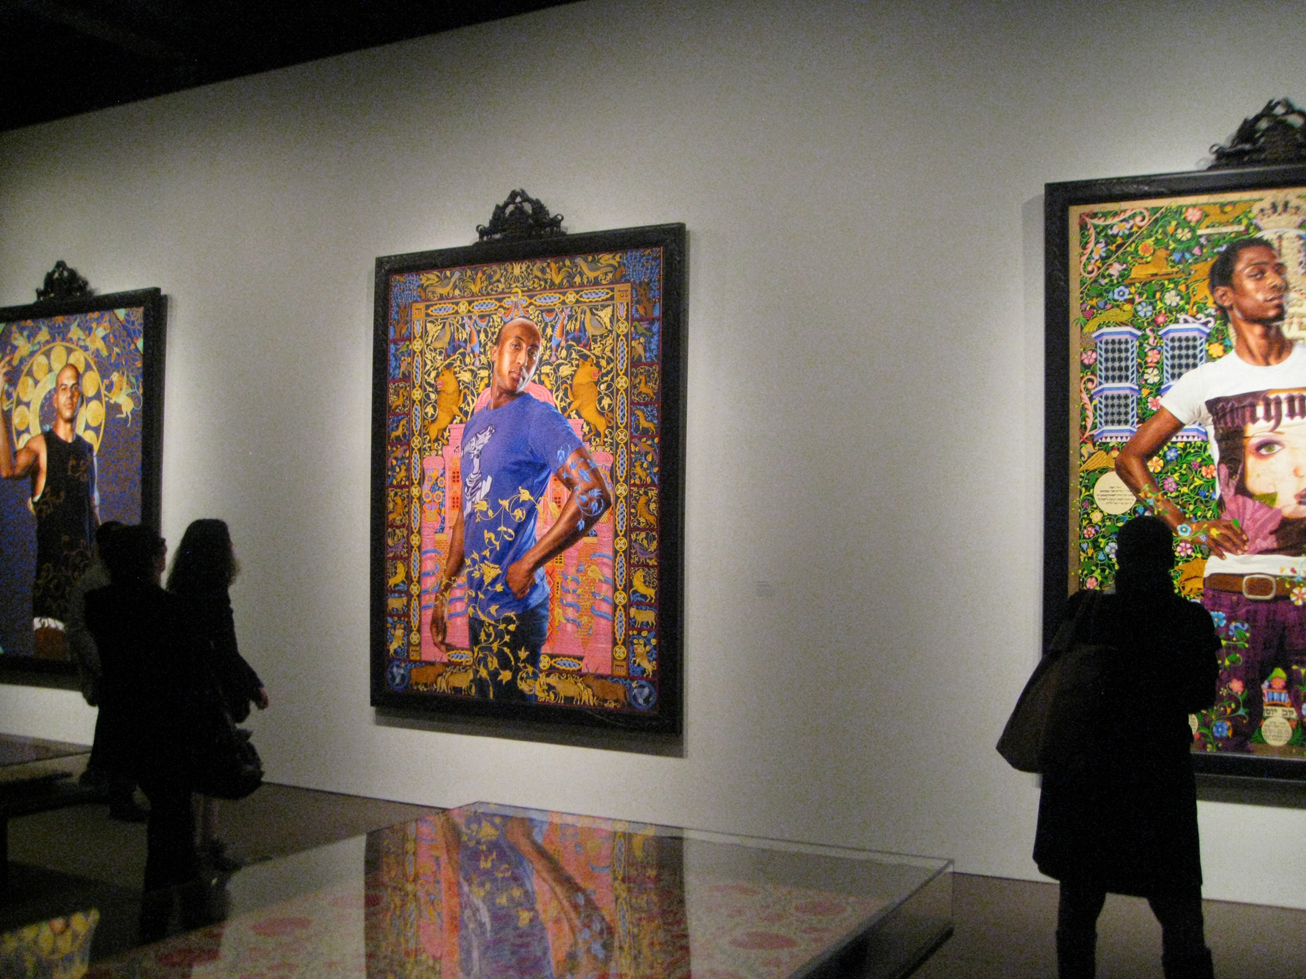 Kehinde Wiley | The World Stage: Israel, The Jewish Museum, New York City, USA, March 9 - July 29, 2012 | 3